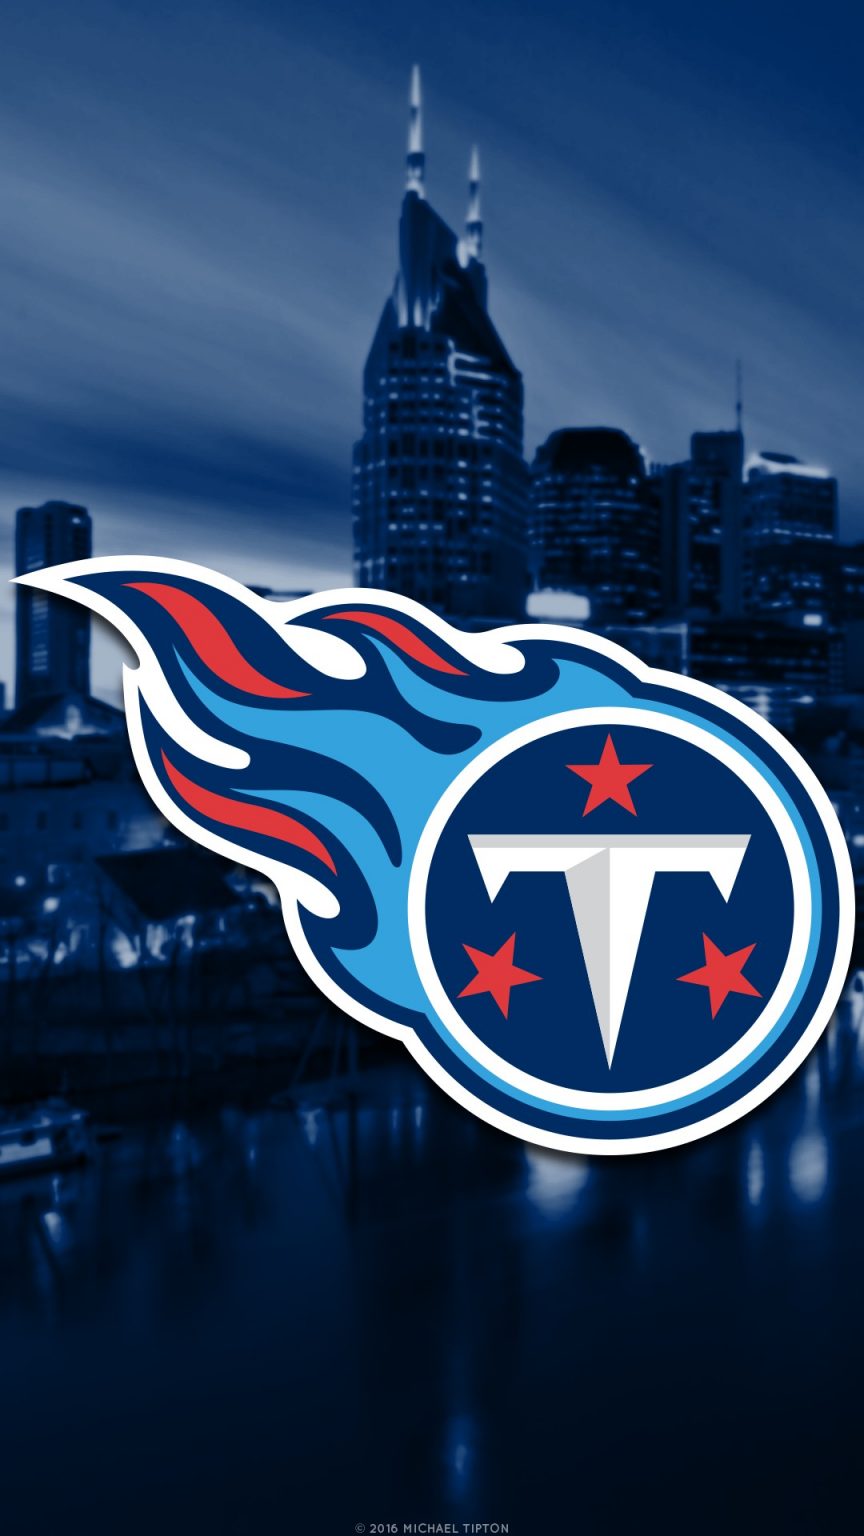 Tennessee Titans iPhone 7 Wallpaper | 2021 NFL Football Wallpapers